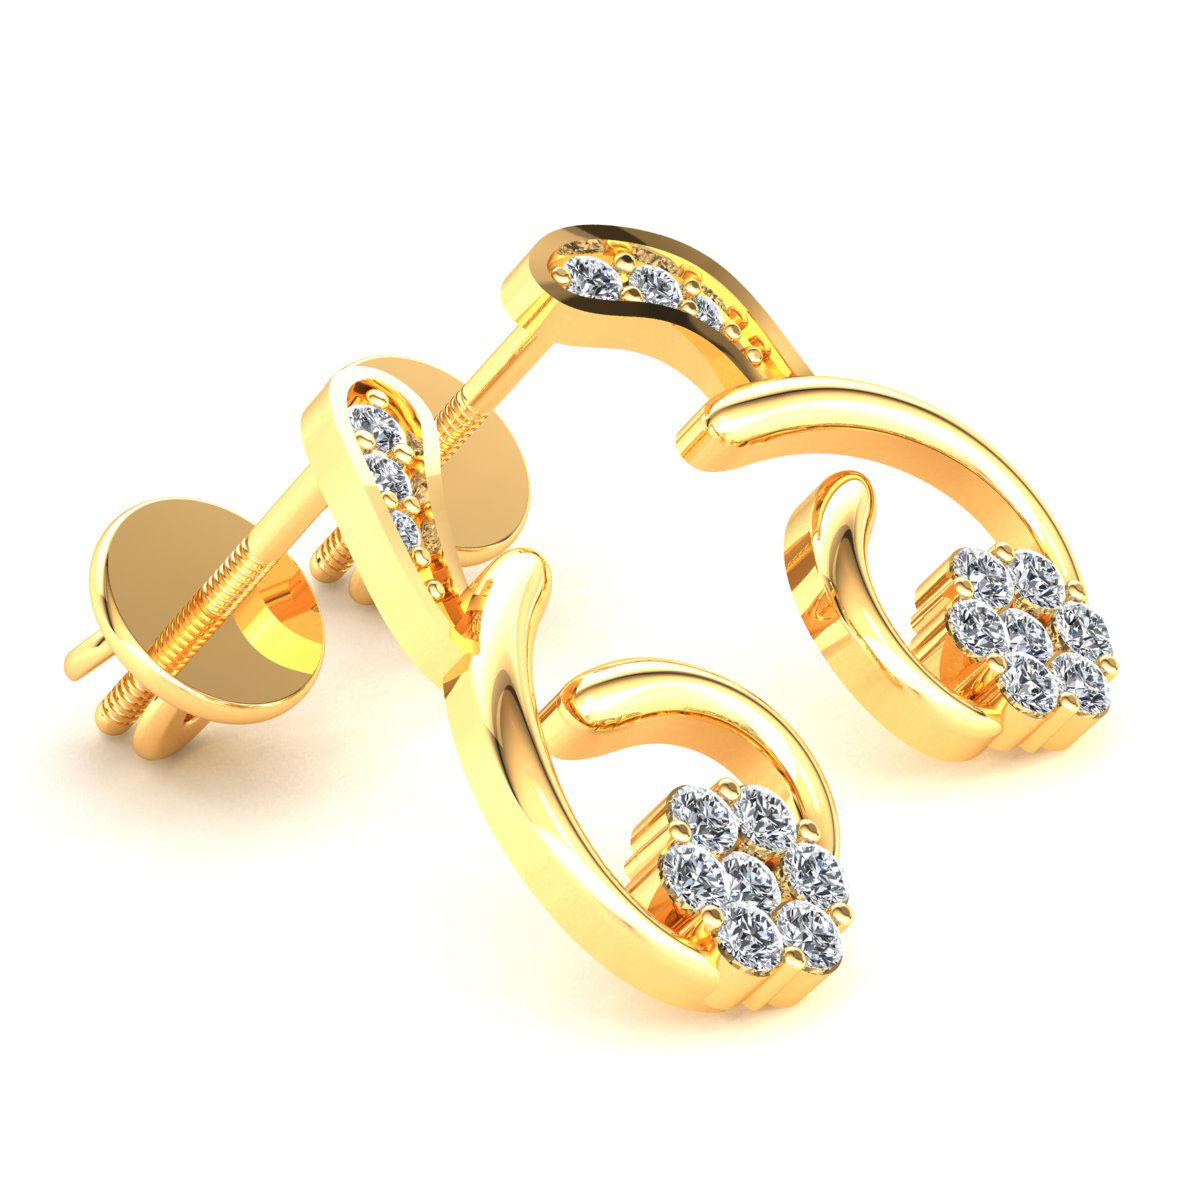 Details about   Natural 0.15ctw Round Diamond Ladies Cluster Flower Earrings 14K Gold